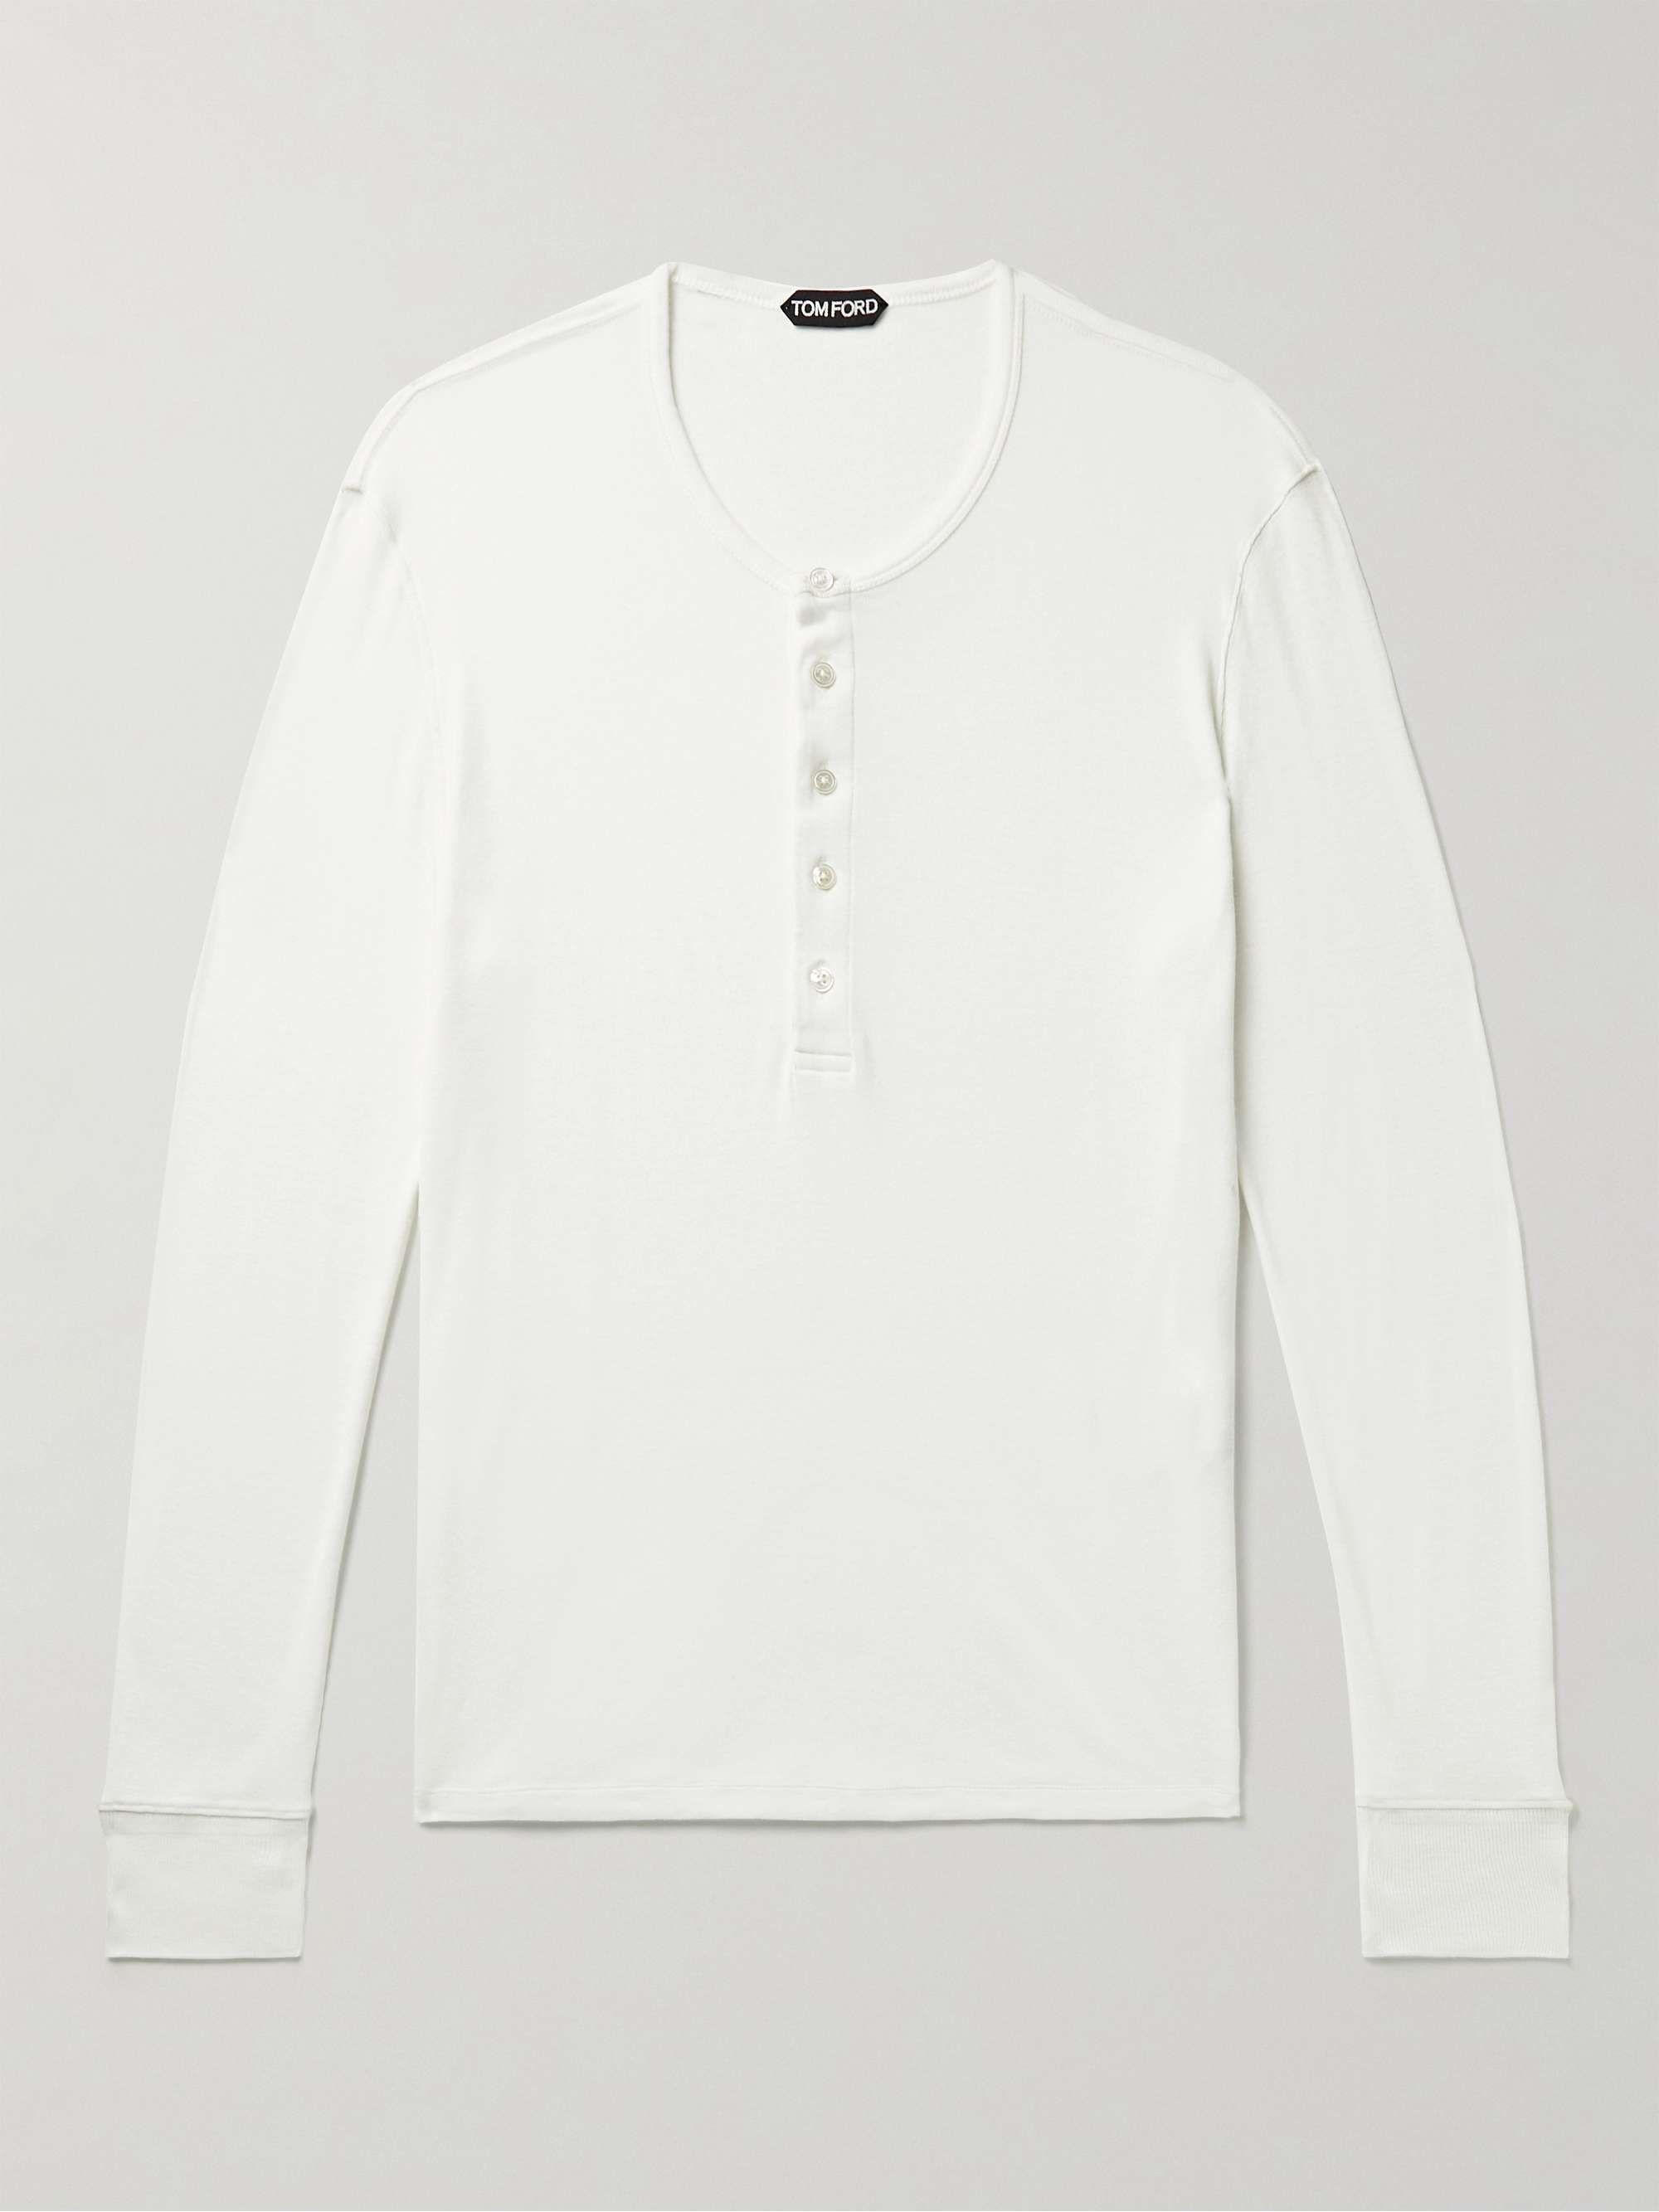 White Cotton and Modal-Blend Jersey Henley T-Shirt | TOM FORD | MR PORTER